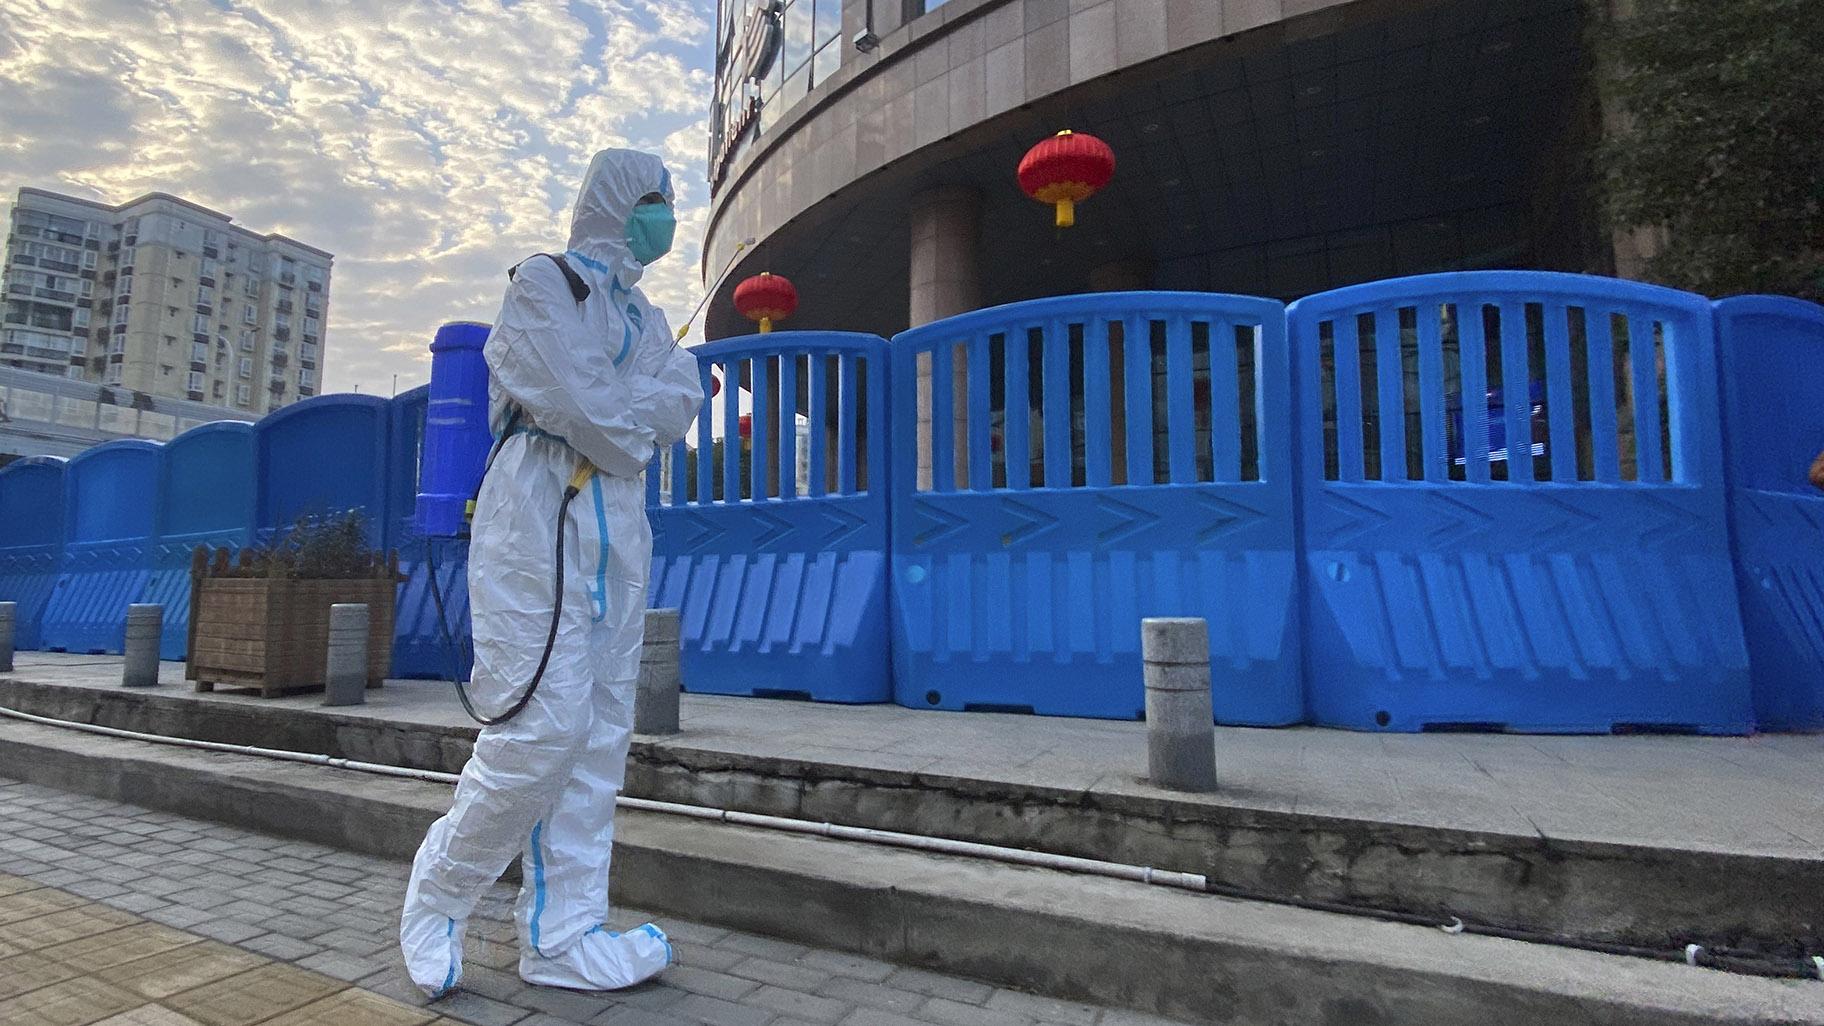 A worker in protectively overalls and carrying disinfecting equipment walks outside the Wuhan Central Hospital, China on Feb. 6, 2021. (AP Photo / Ng Han Guan, File)